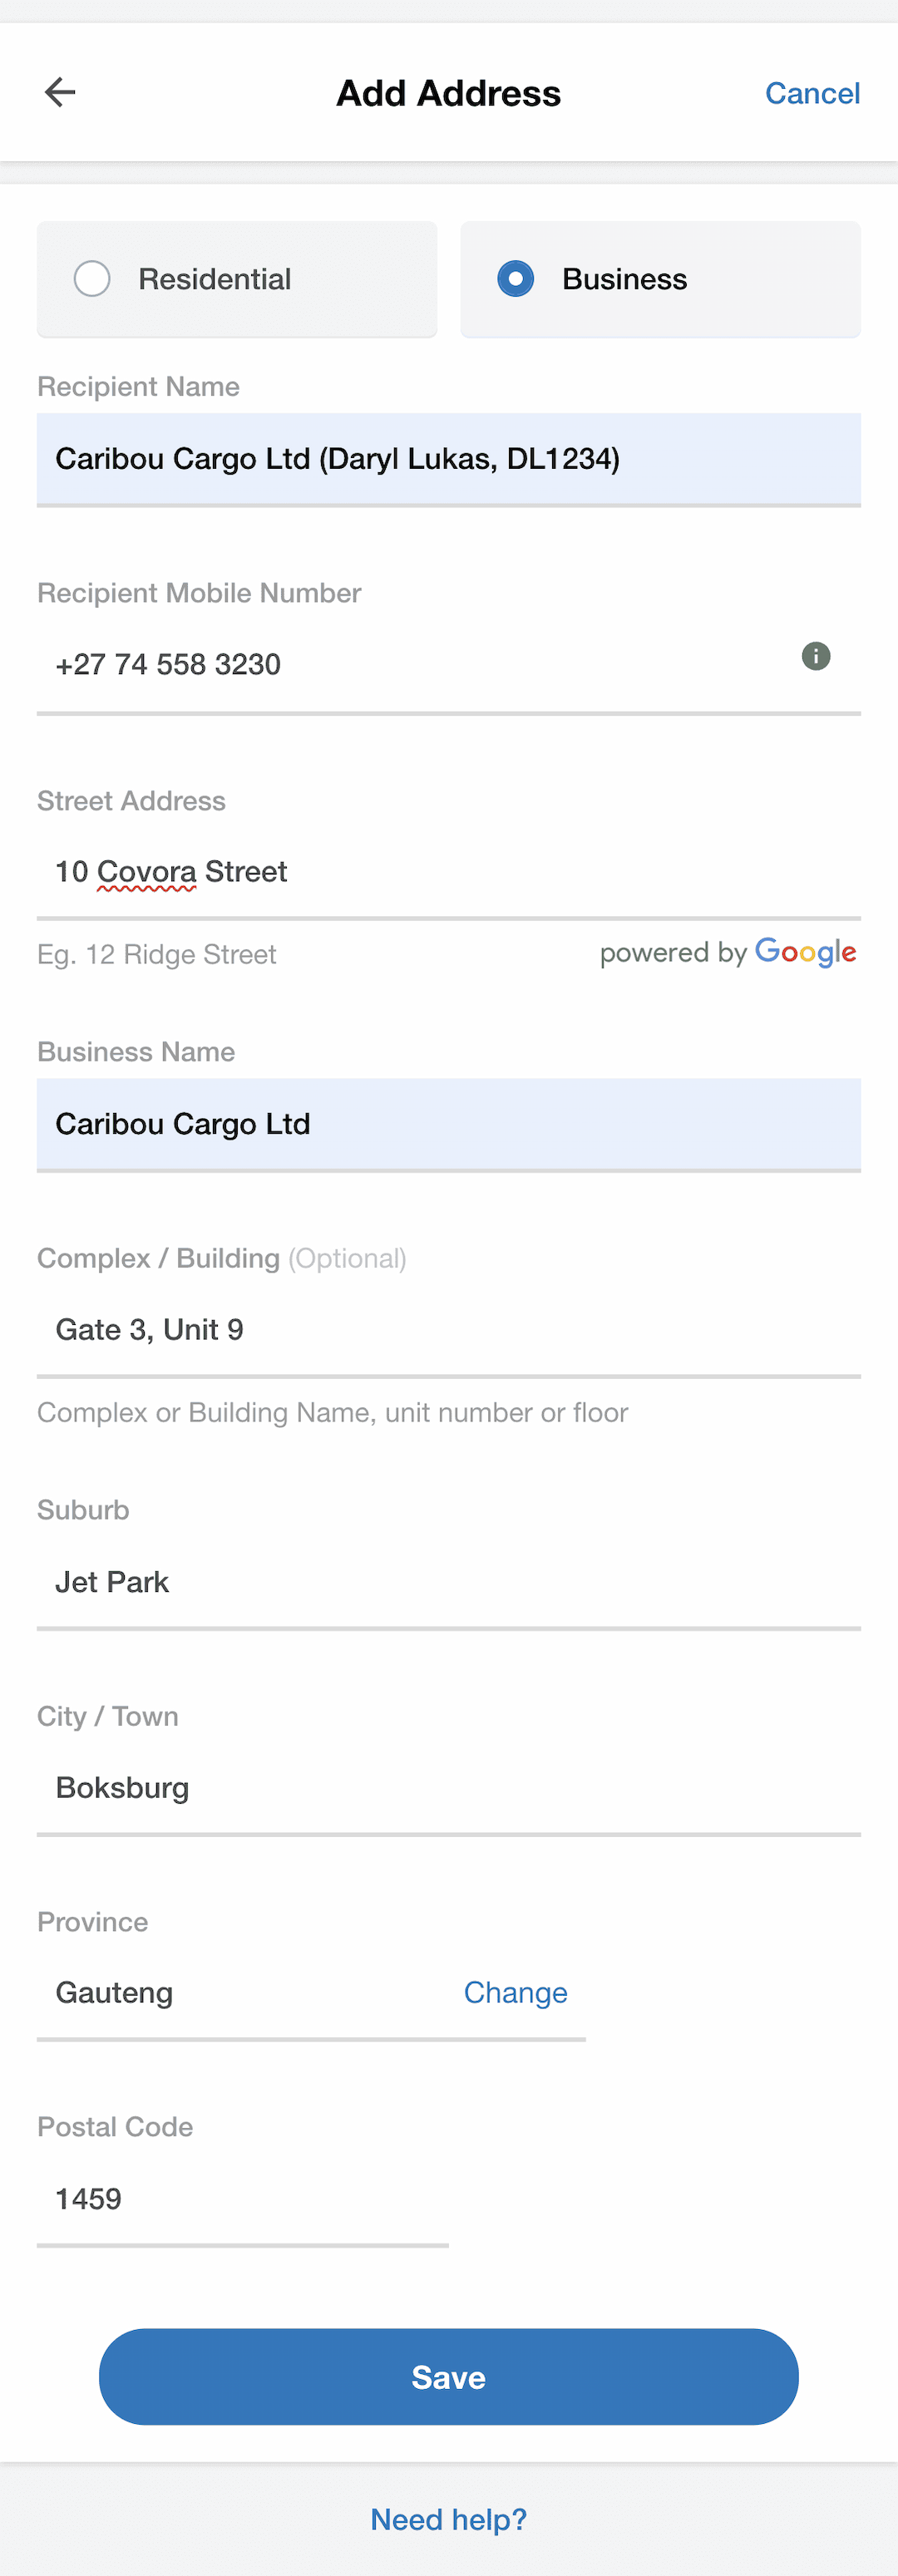 A screenshot showing how to ship with Caribo Cargo